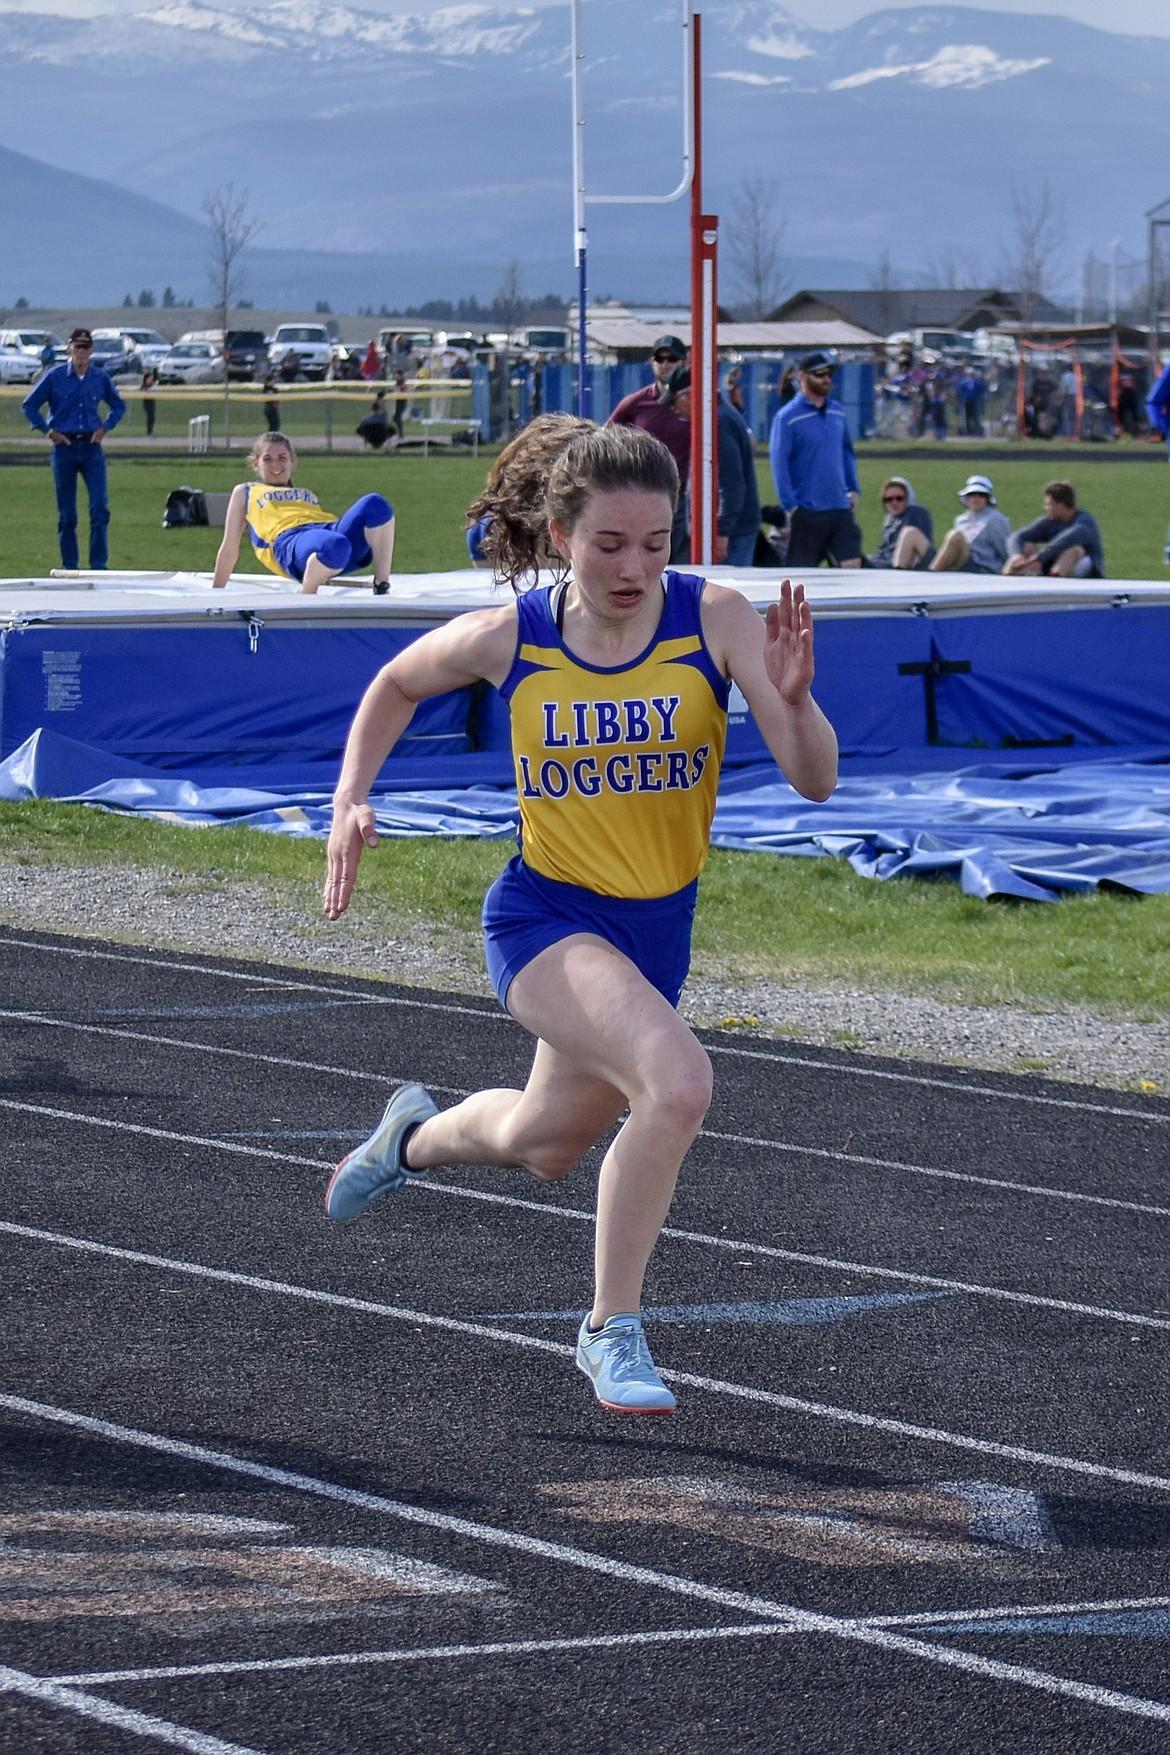 Libby junior Emma Gruber crosses the finish line after winning the 100m hurdles in 17.29 seconds at the Lincoln County Track Meet Tuesday. (Benjamin Kibbey/The Western News)